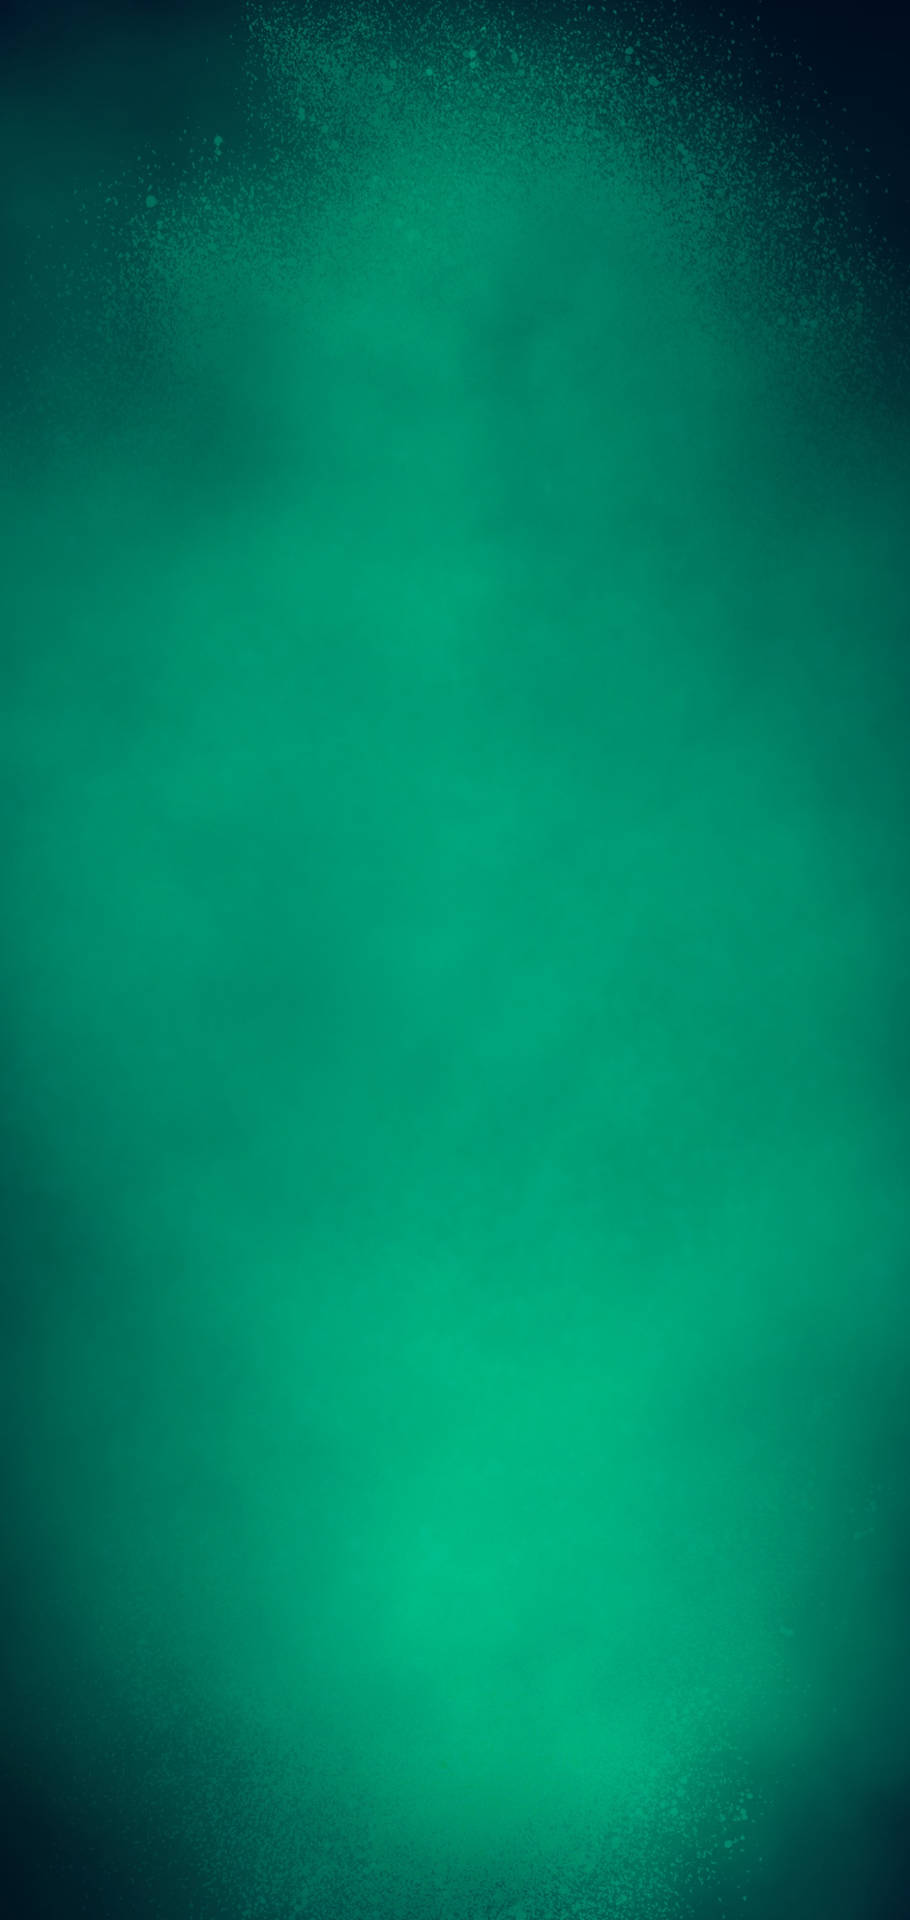 Android 11 Green Mist Background Wallpaper